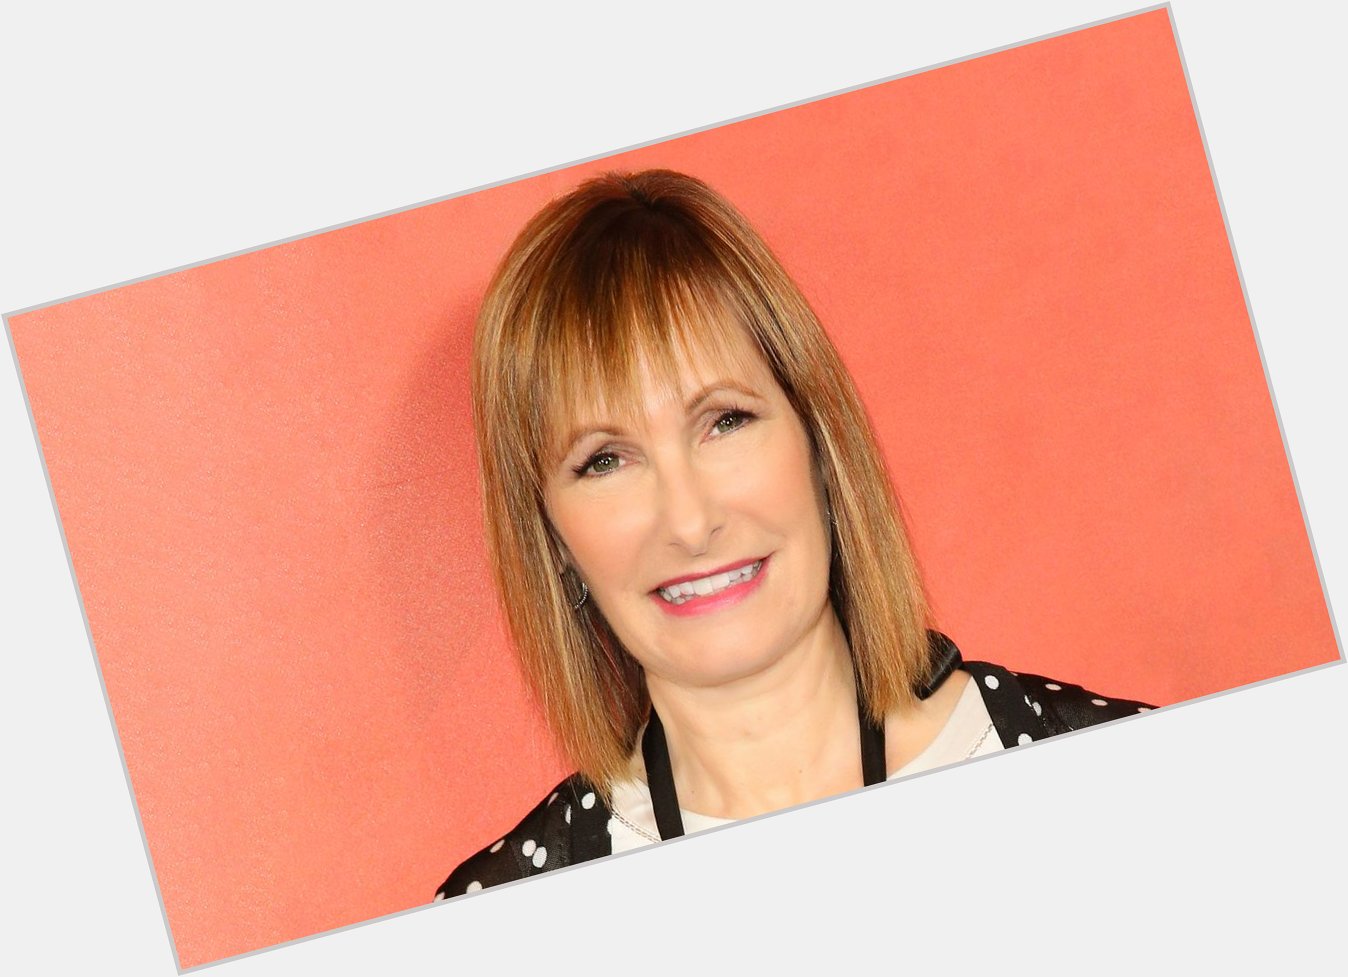  HAPPY BIRTHDAY to Terminator producer and Terminator 2 executive producer Gale Anne Hurd 